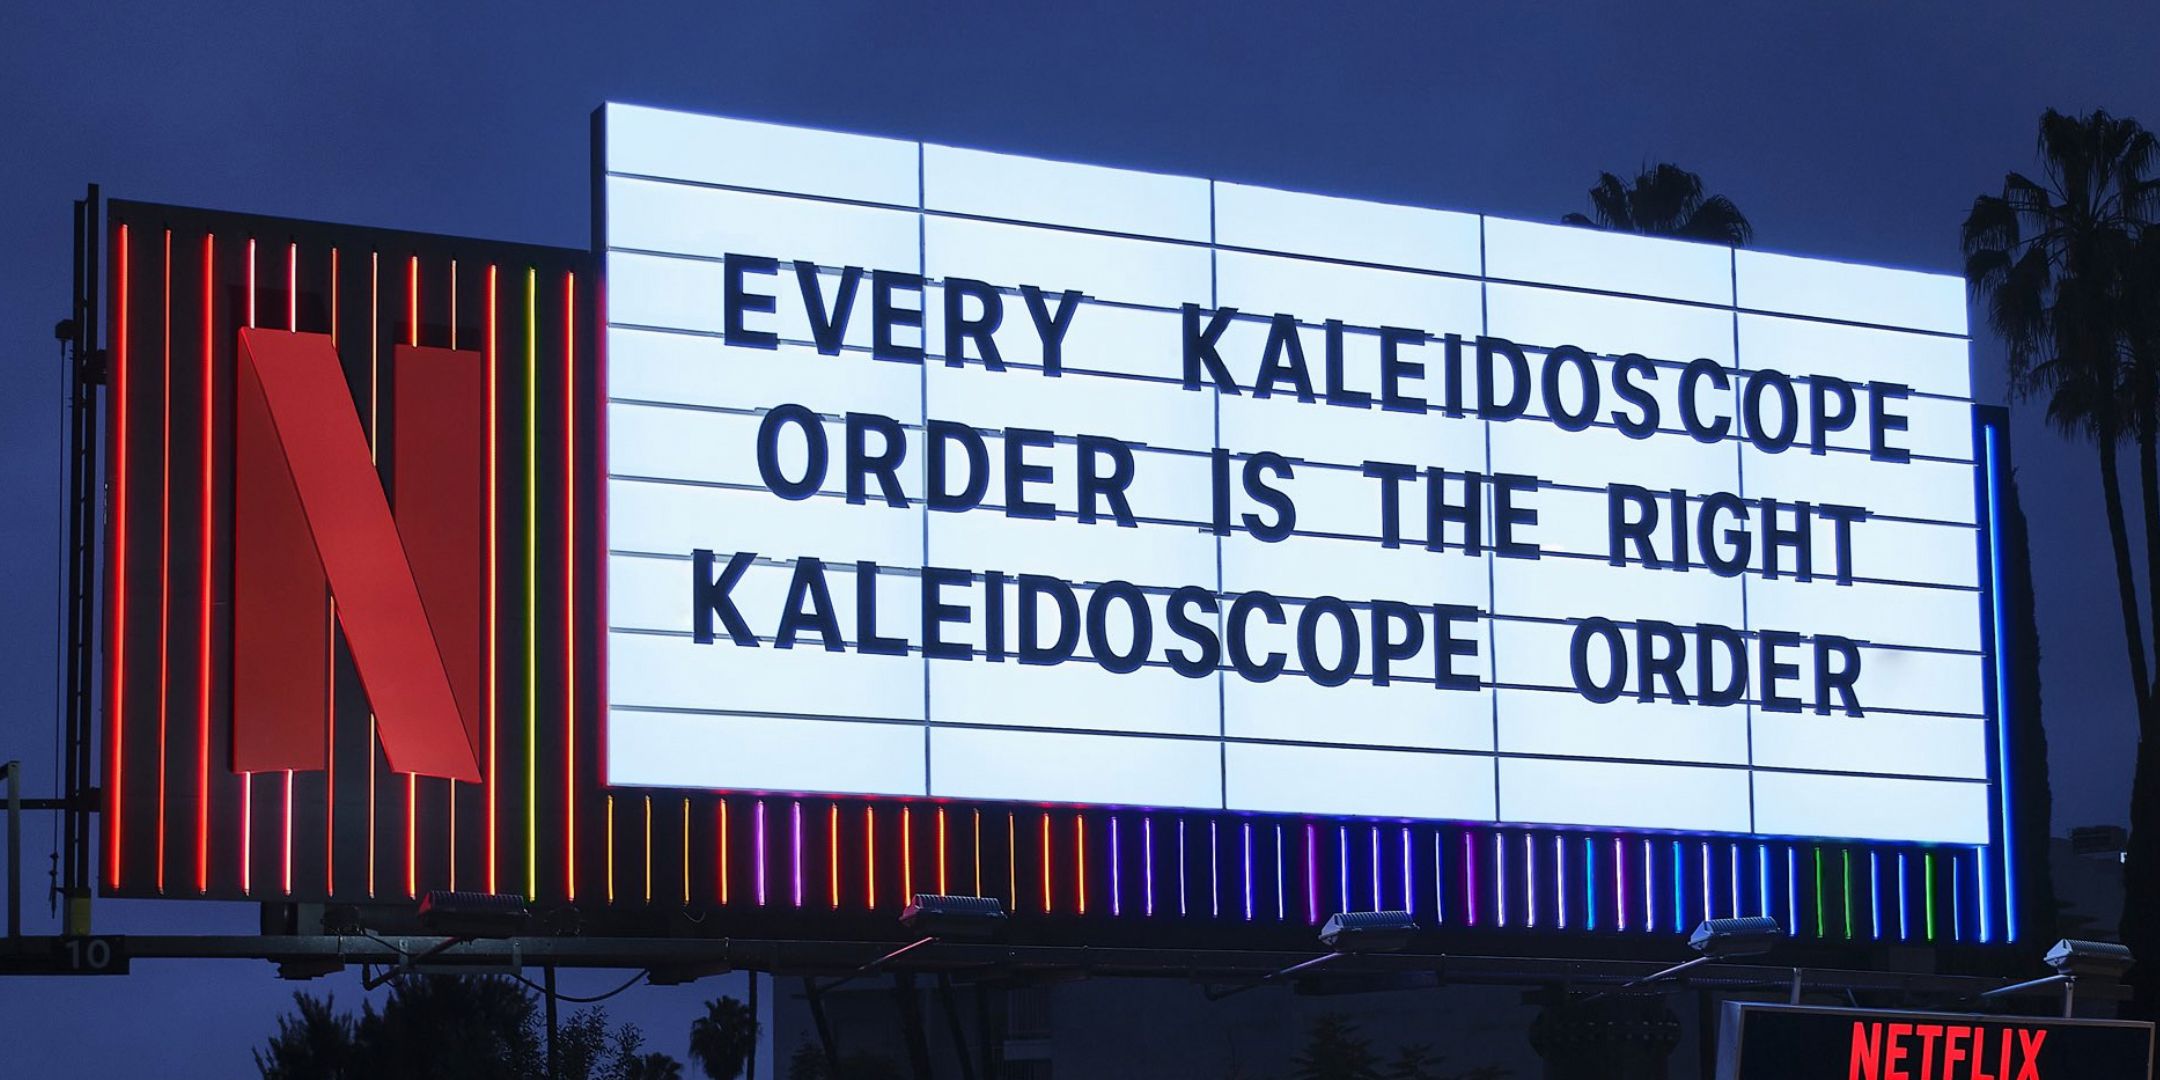 Netflix billboard for Kaleidoscope reads every order is the right order